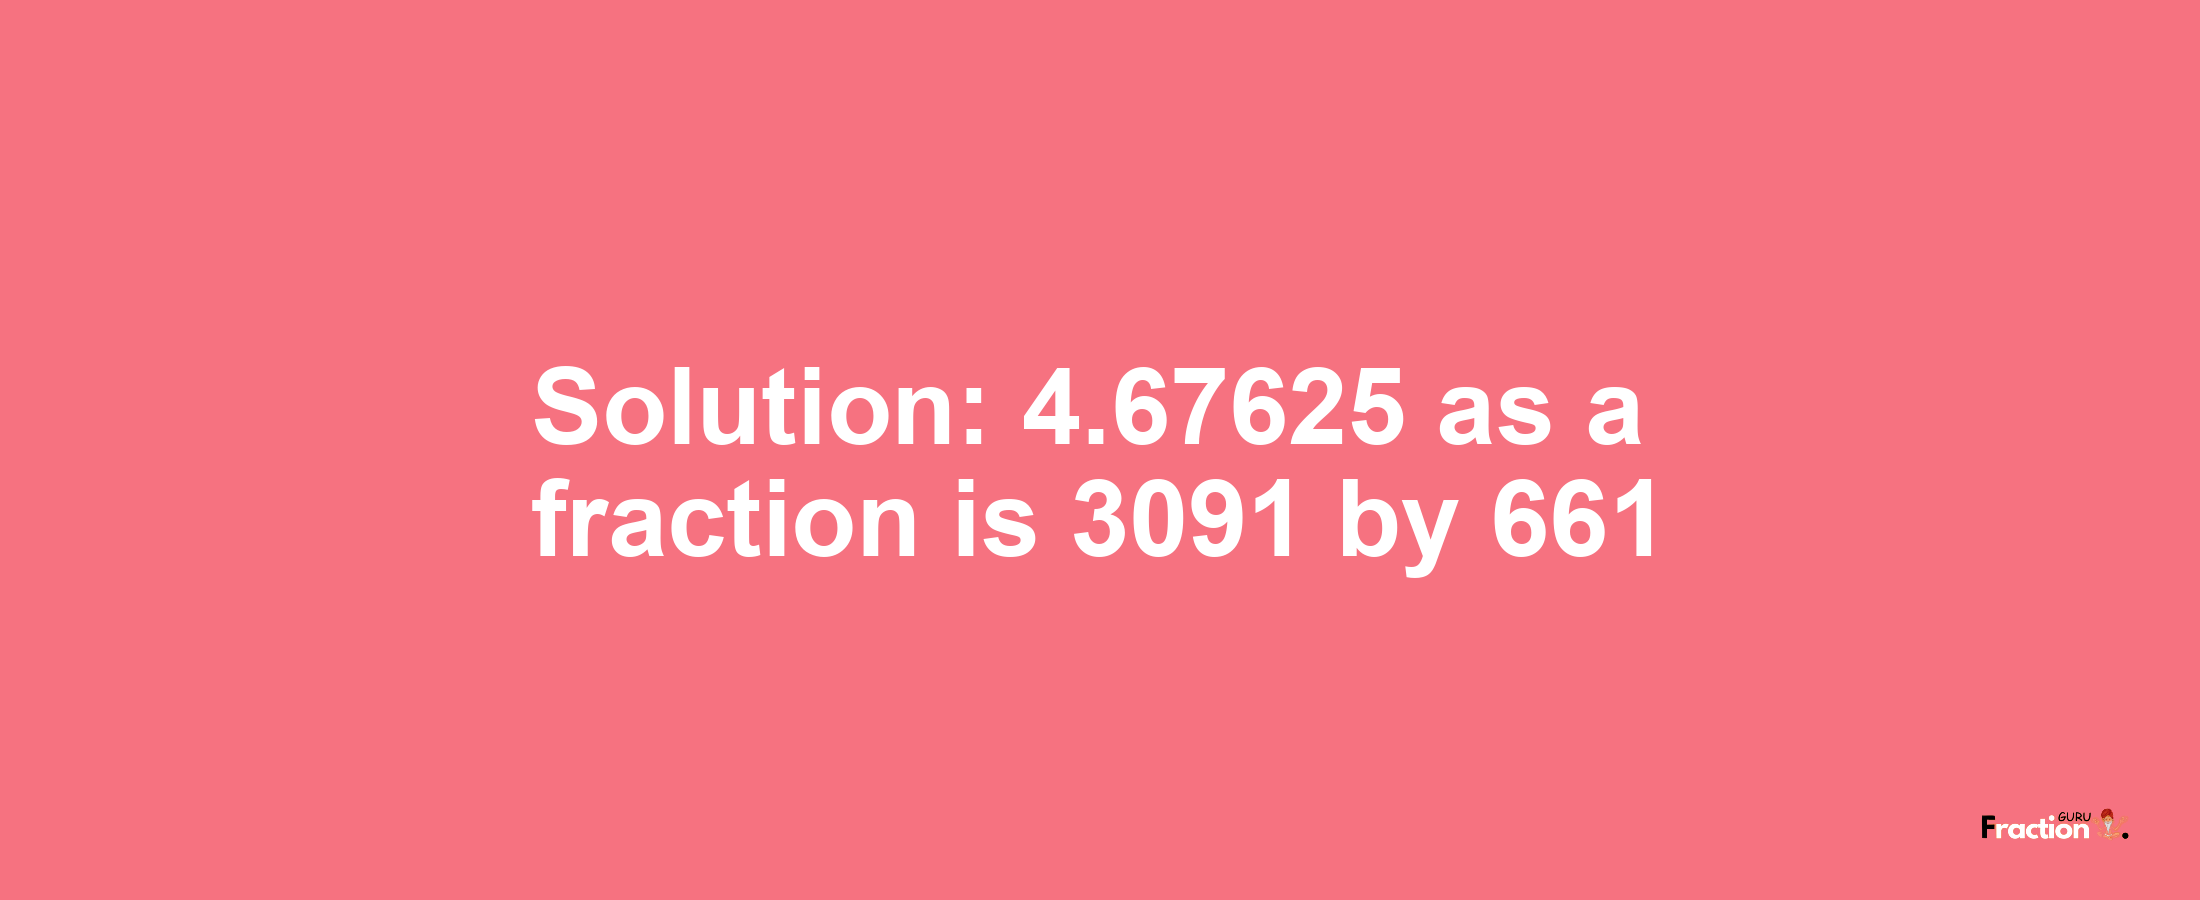 Solution:4.67625 as a fraction is 3091/661